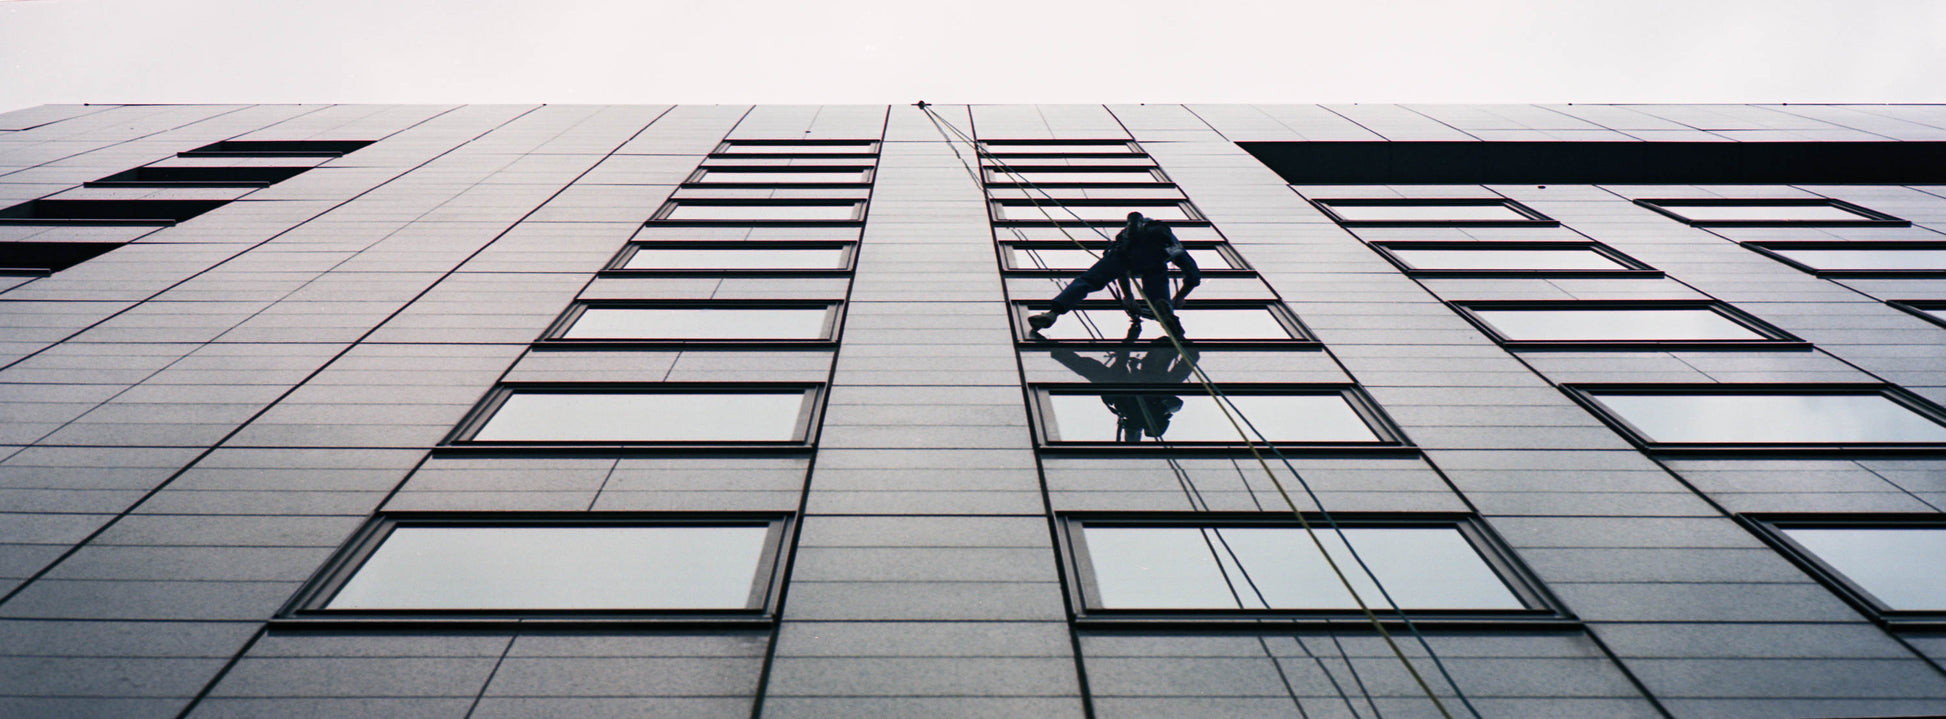 A window cleaner hanging in front of the windows